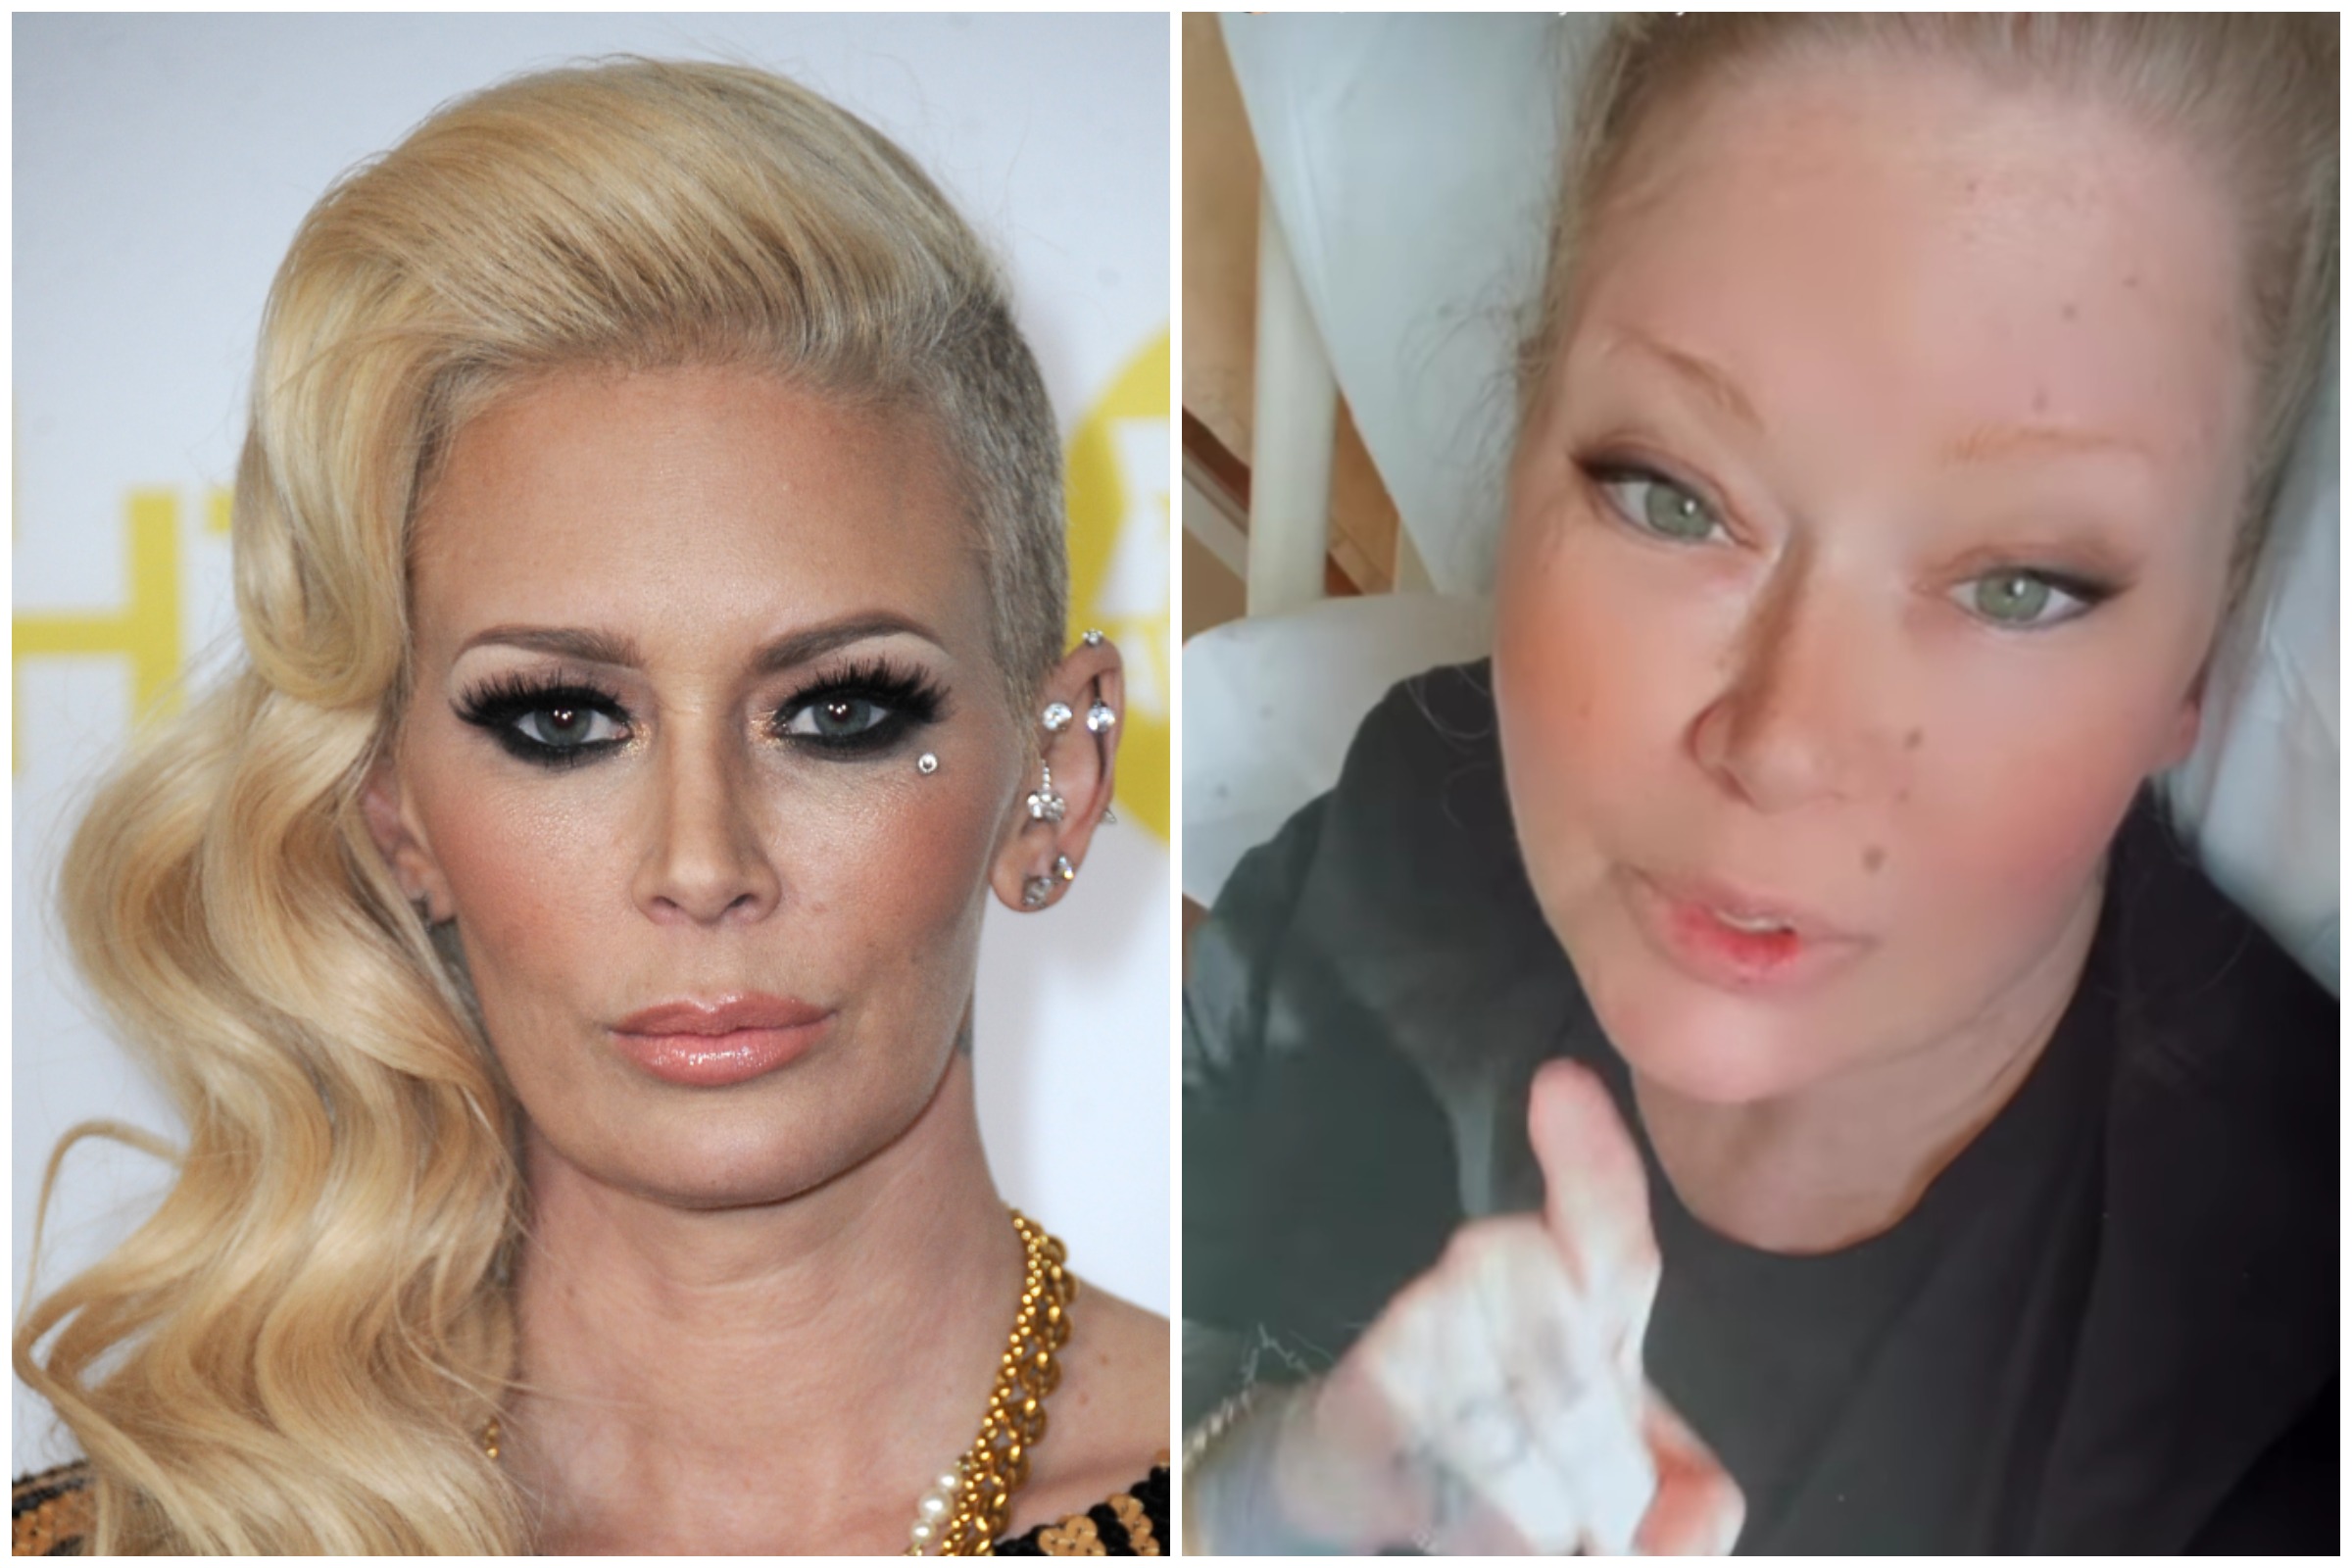 Jenna Jameson Will Be Out Of Hospital Soon After Battling Mystery Illness